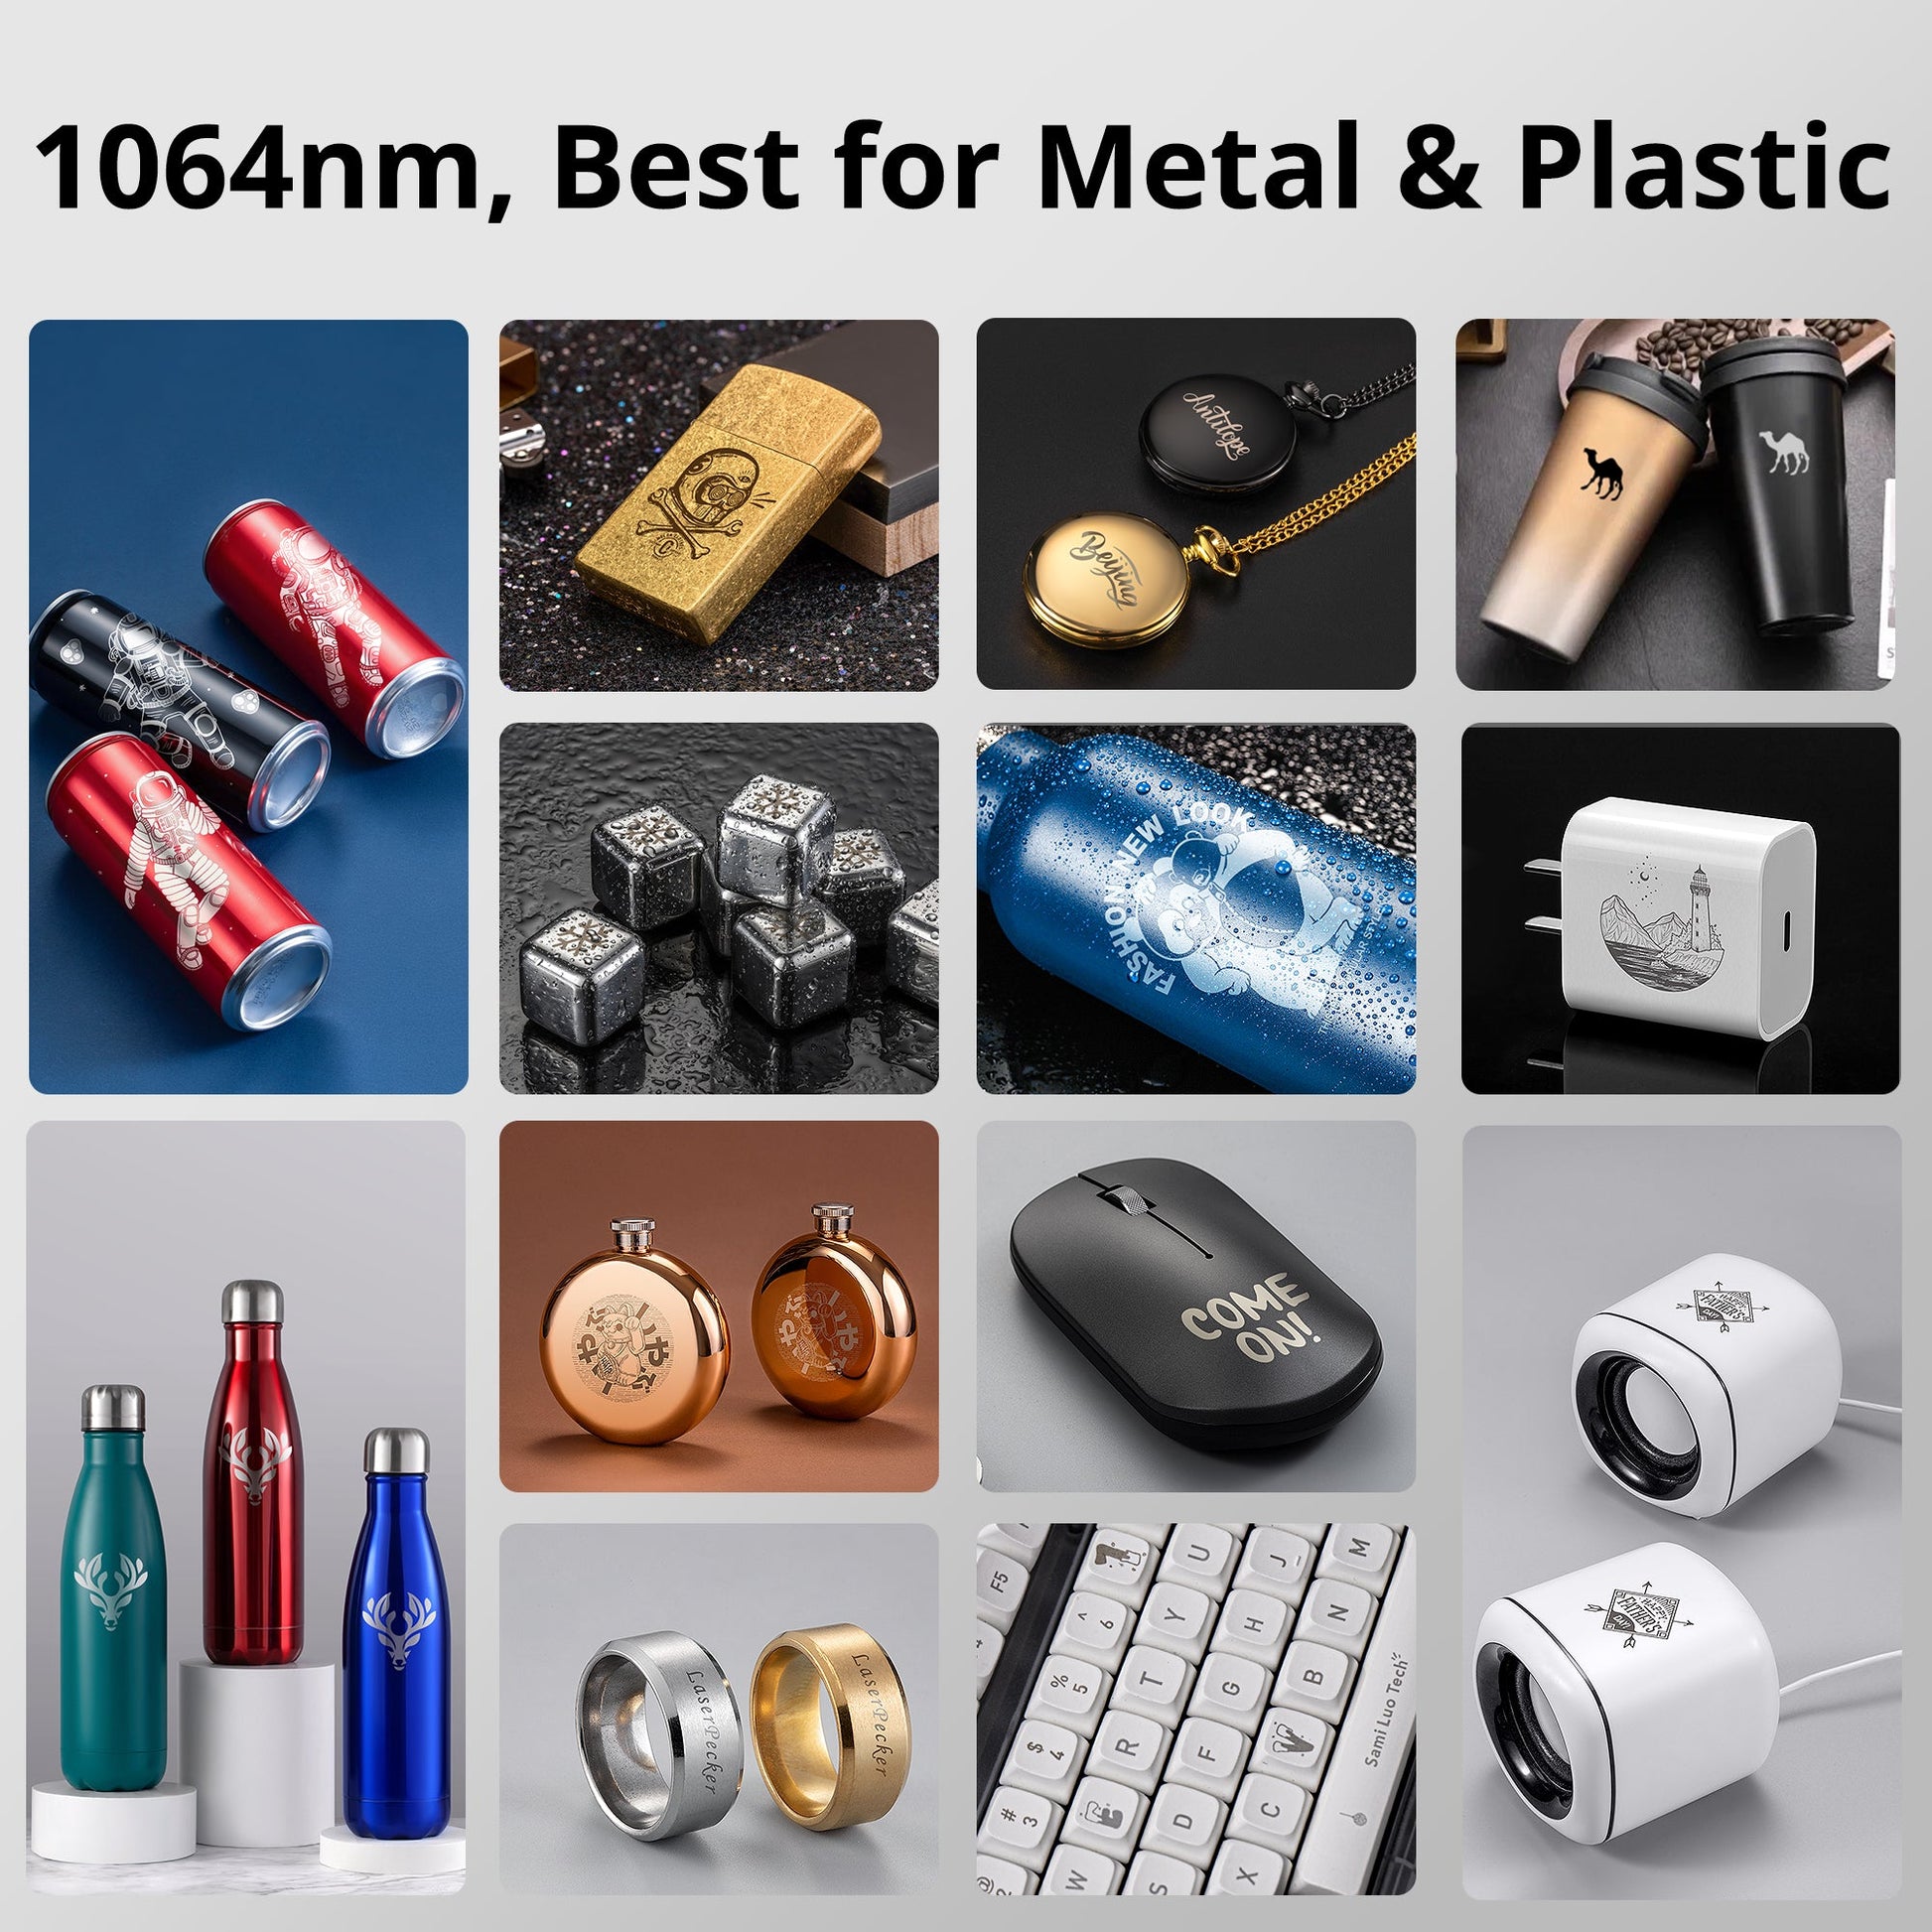 1064nm Infrared Laser ist speically for metal and plastic engraving